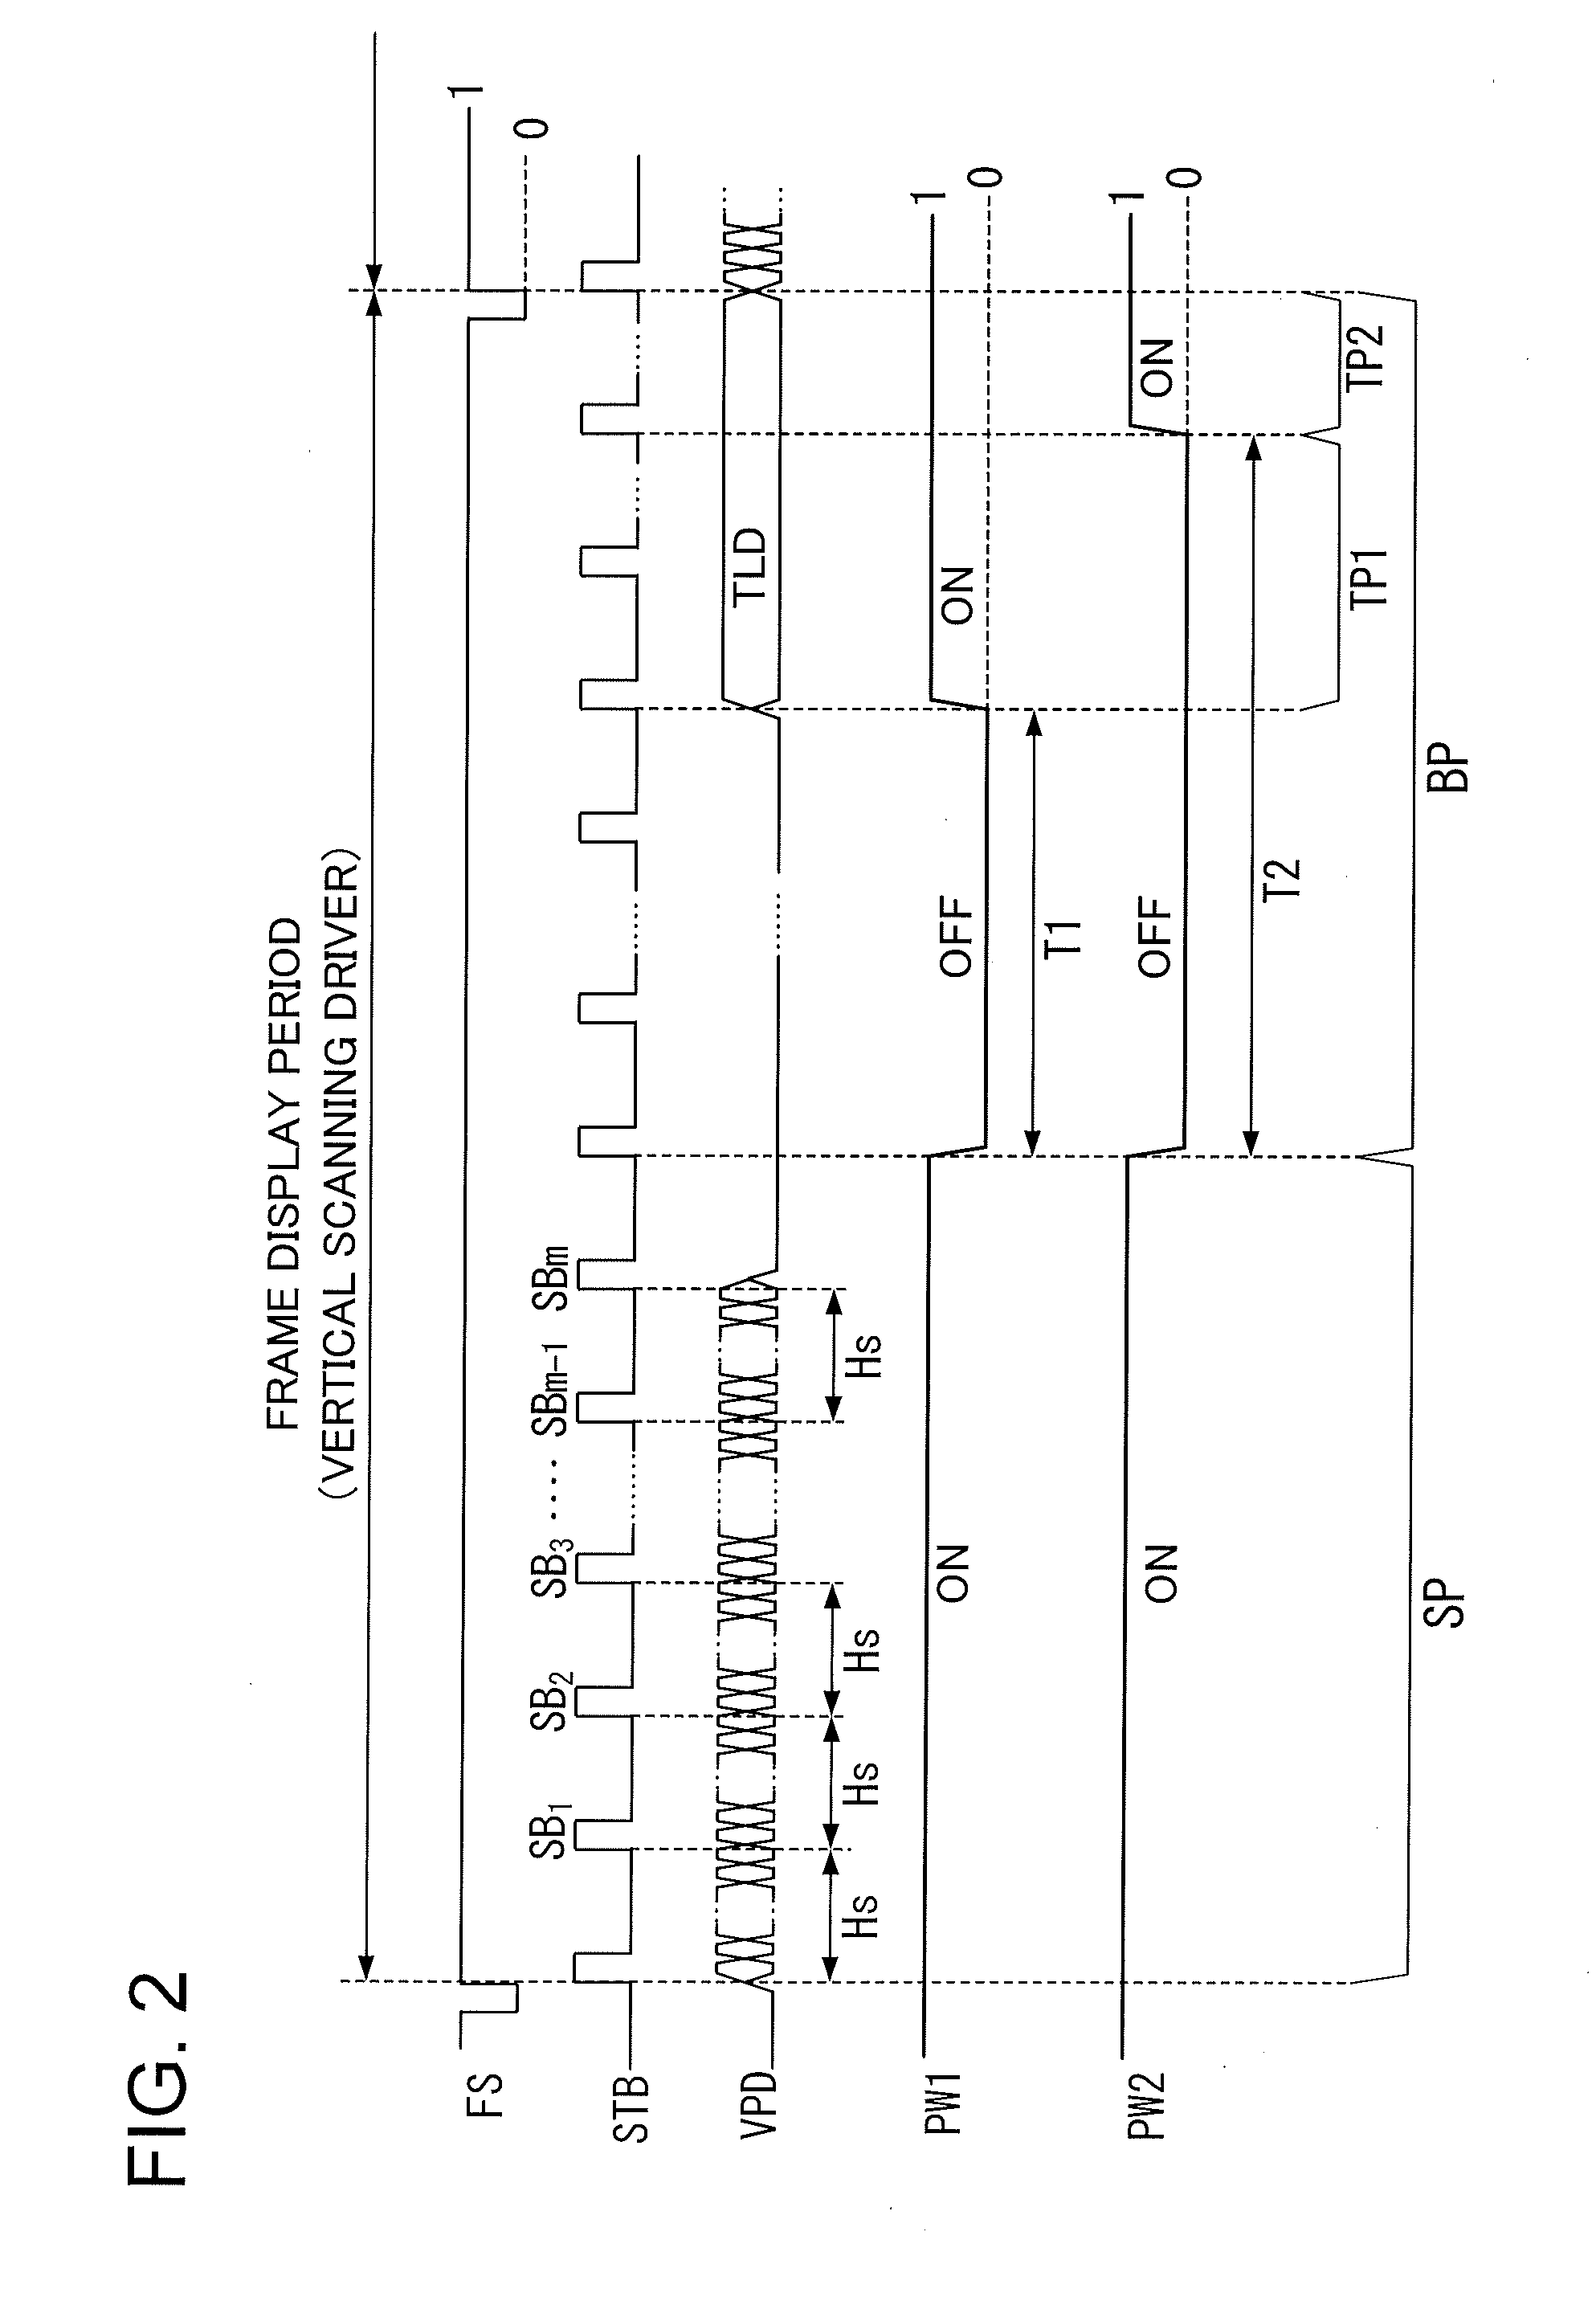 Driving device for driving display unit